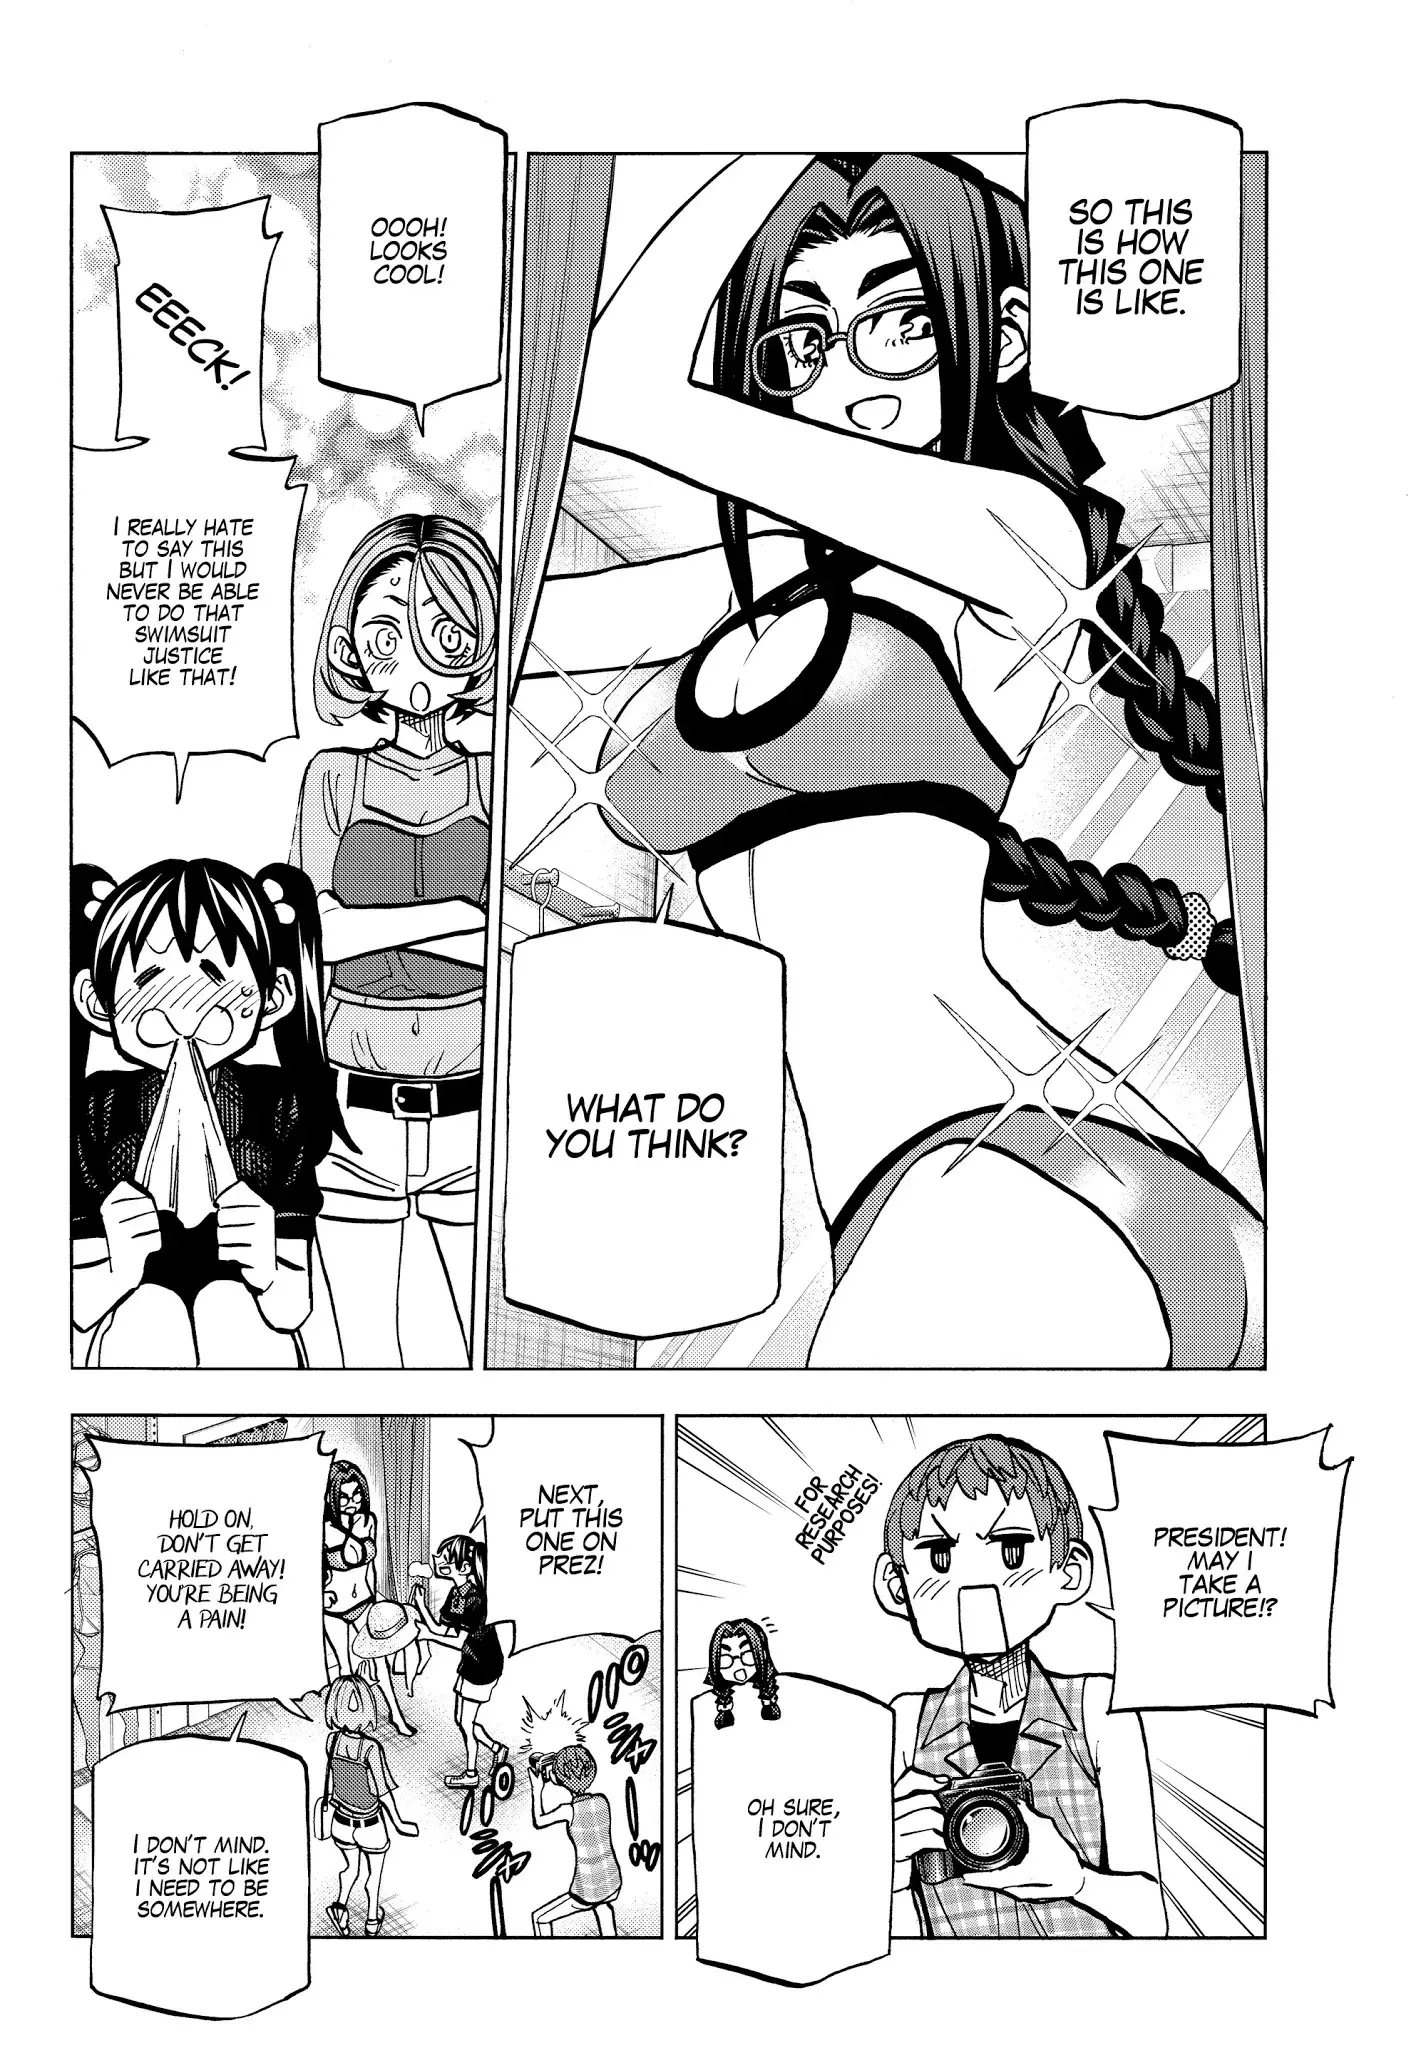 The Story Between A Dumb Prefect And A High School Girl With An Inappropriate Skirt Length - 17 page 13